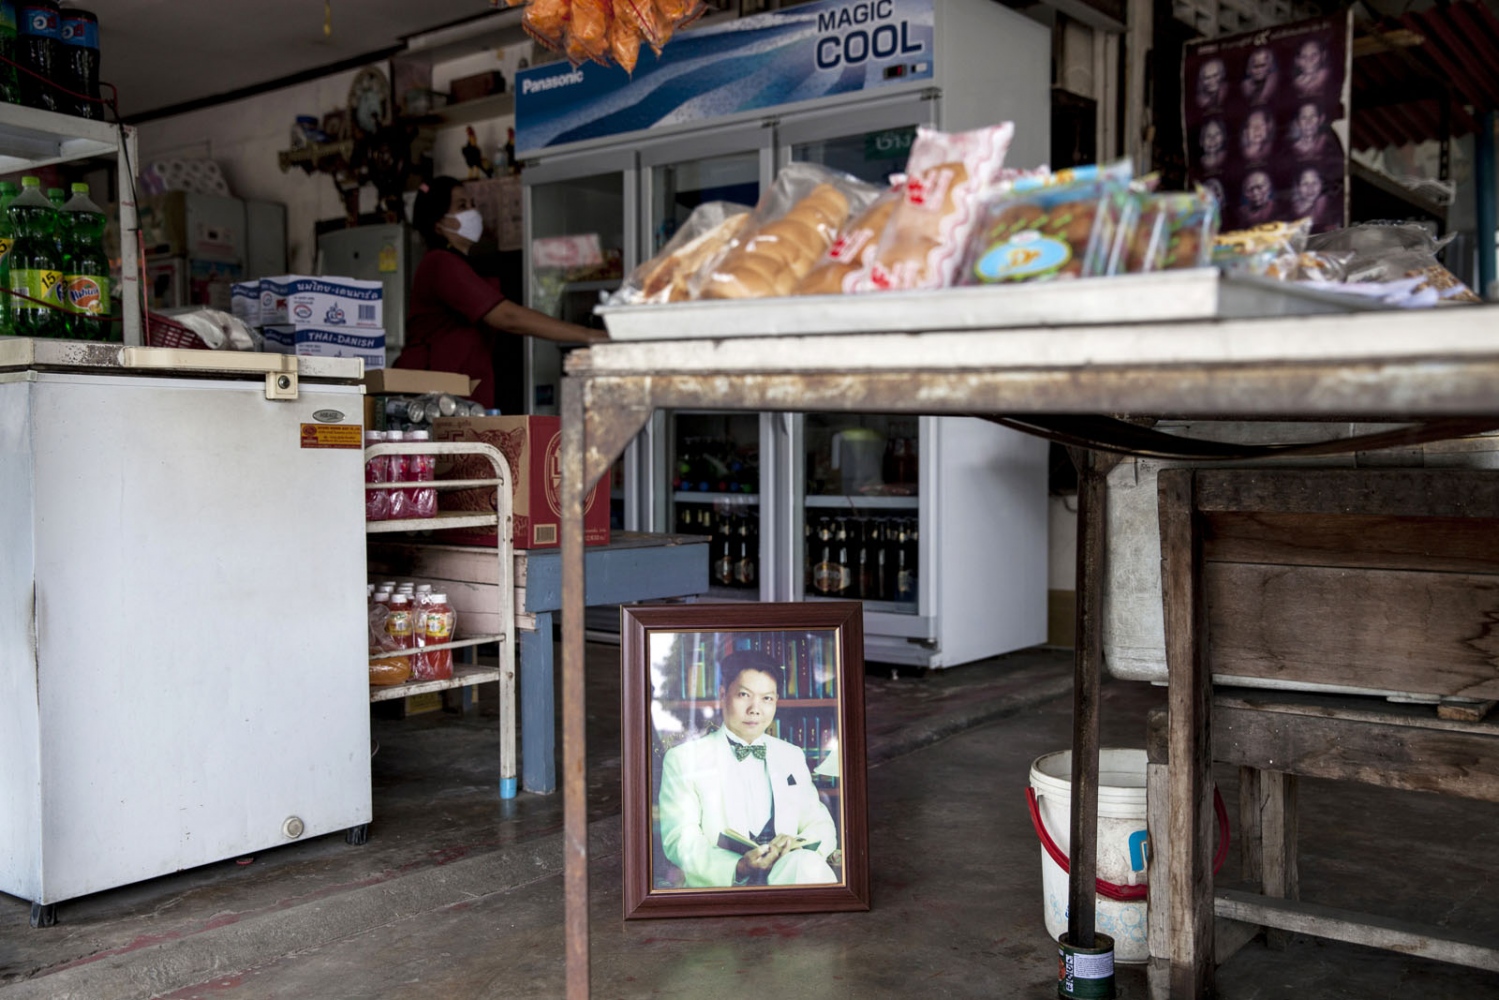 FOR THOSE WHO DIED TRYING -  Suwat Wongpiyasathit, 45, was shot dead inside a shop on...